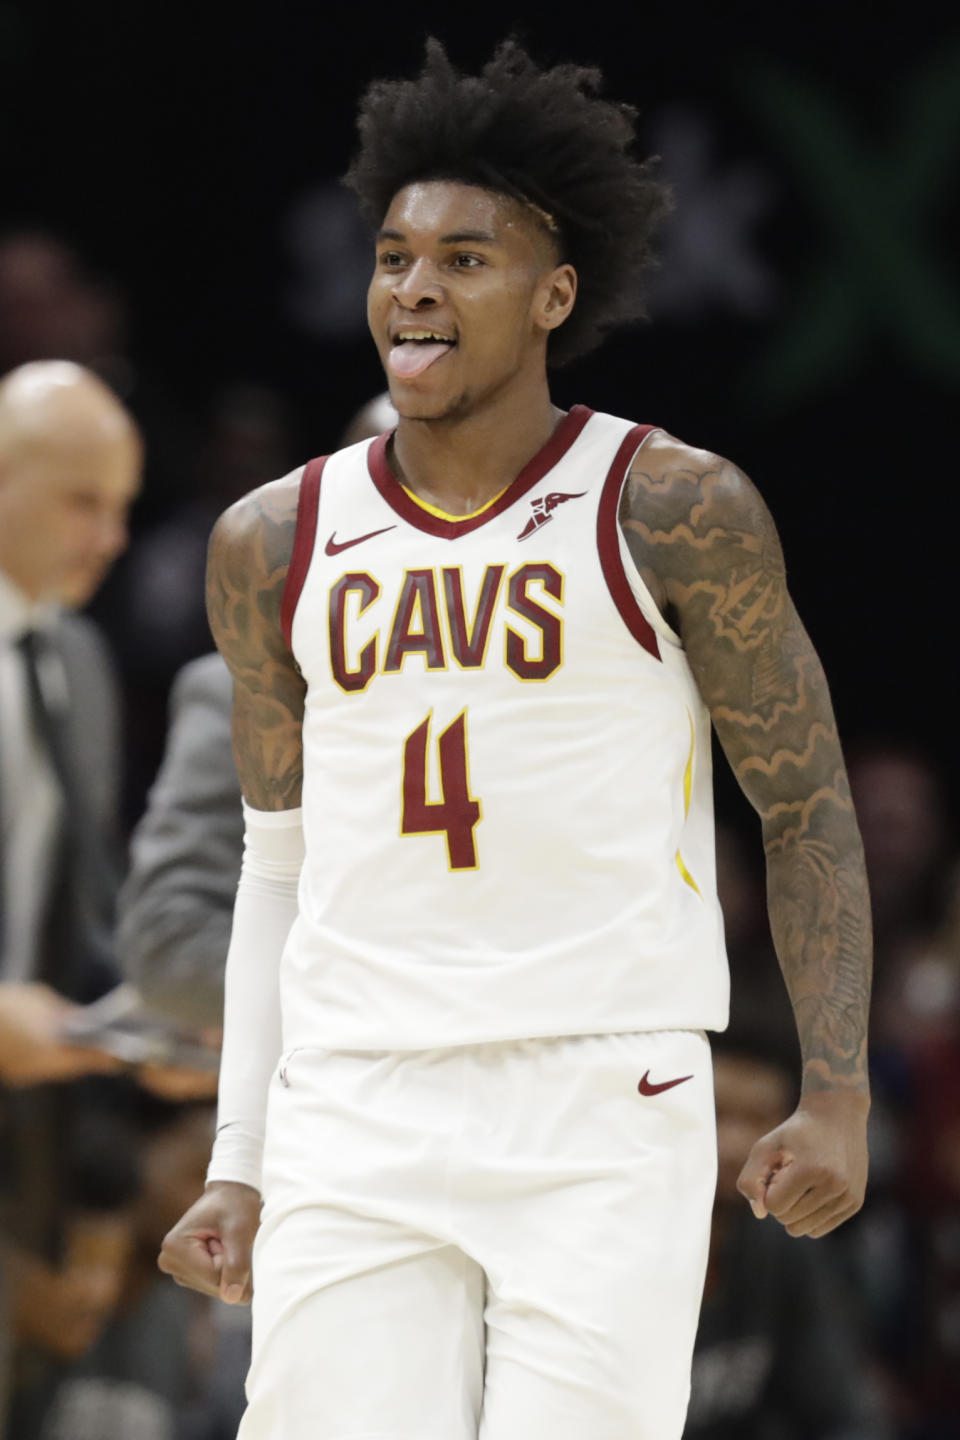 Cleveland Cavaliers' Kevin Porter Jr. reacts after scoring against the Atlanta Hawks during the second half of an NBA basketball game Monday, Dec. 23, 2019, in Cleveland. The Cavaliers won 121-118. (AP Photo/Tony Dejak)